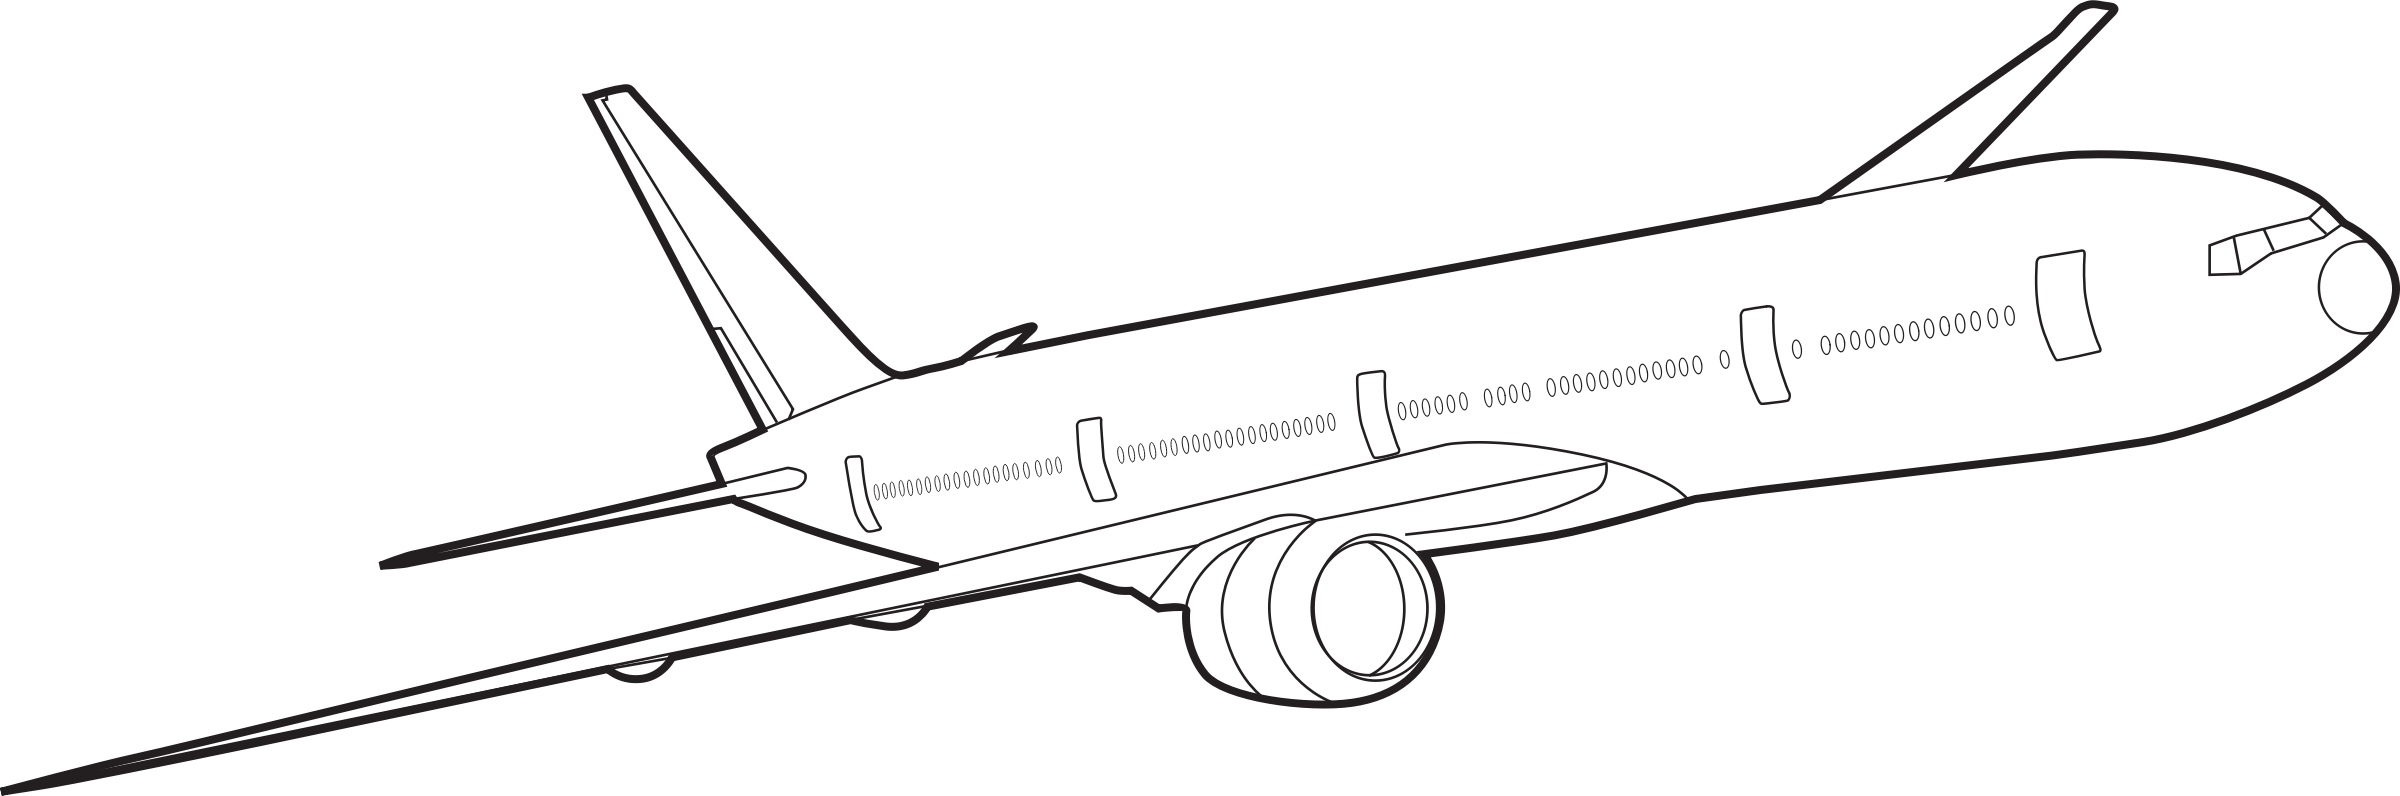 Boeing Airplane Clipart Plane Outlines